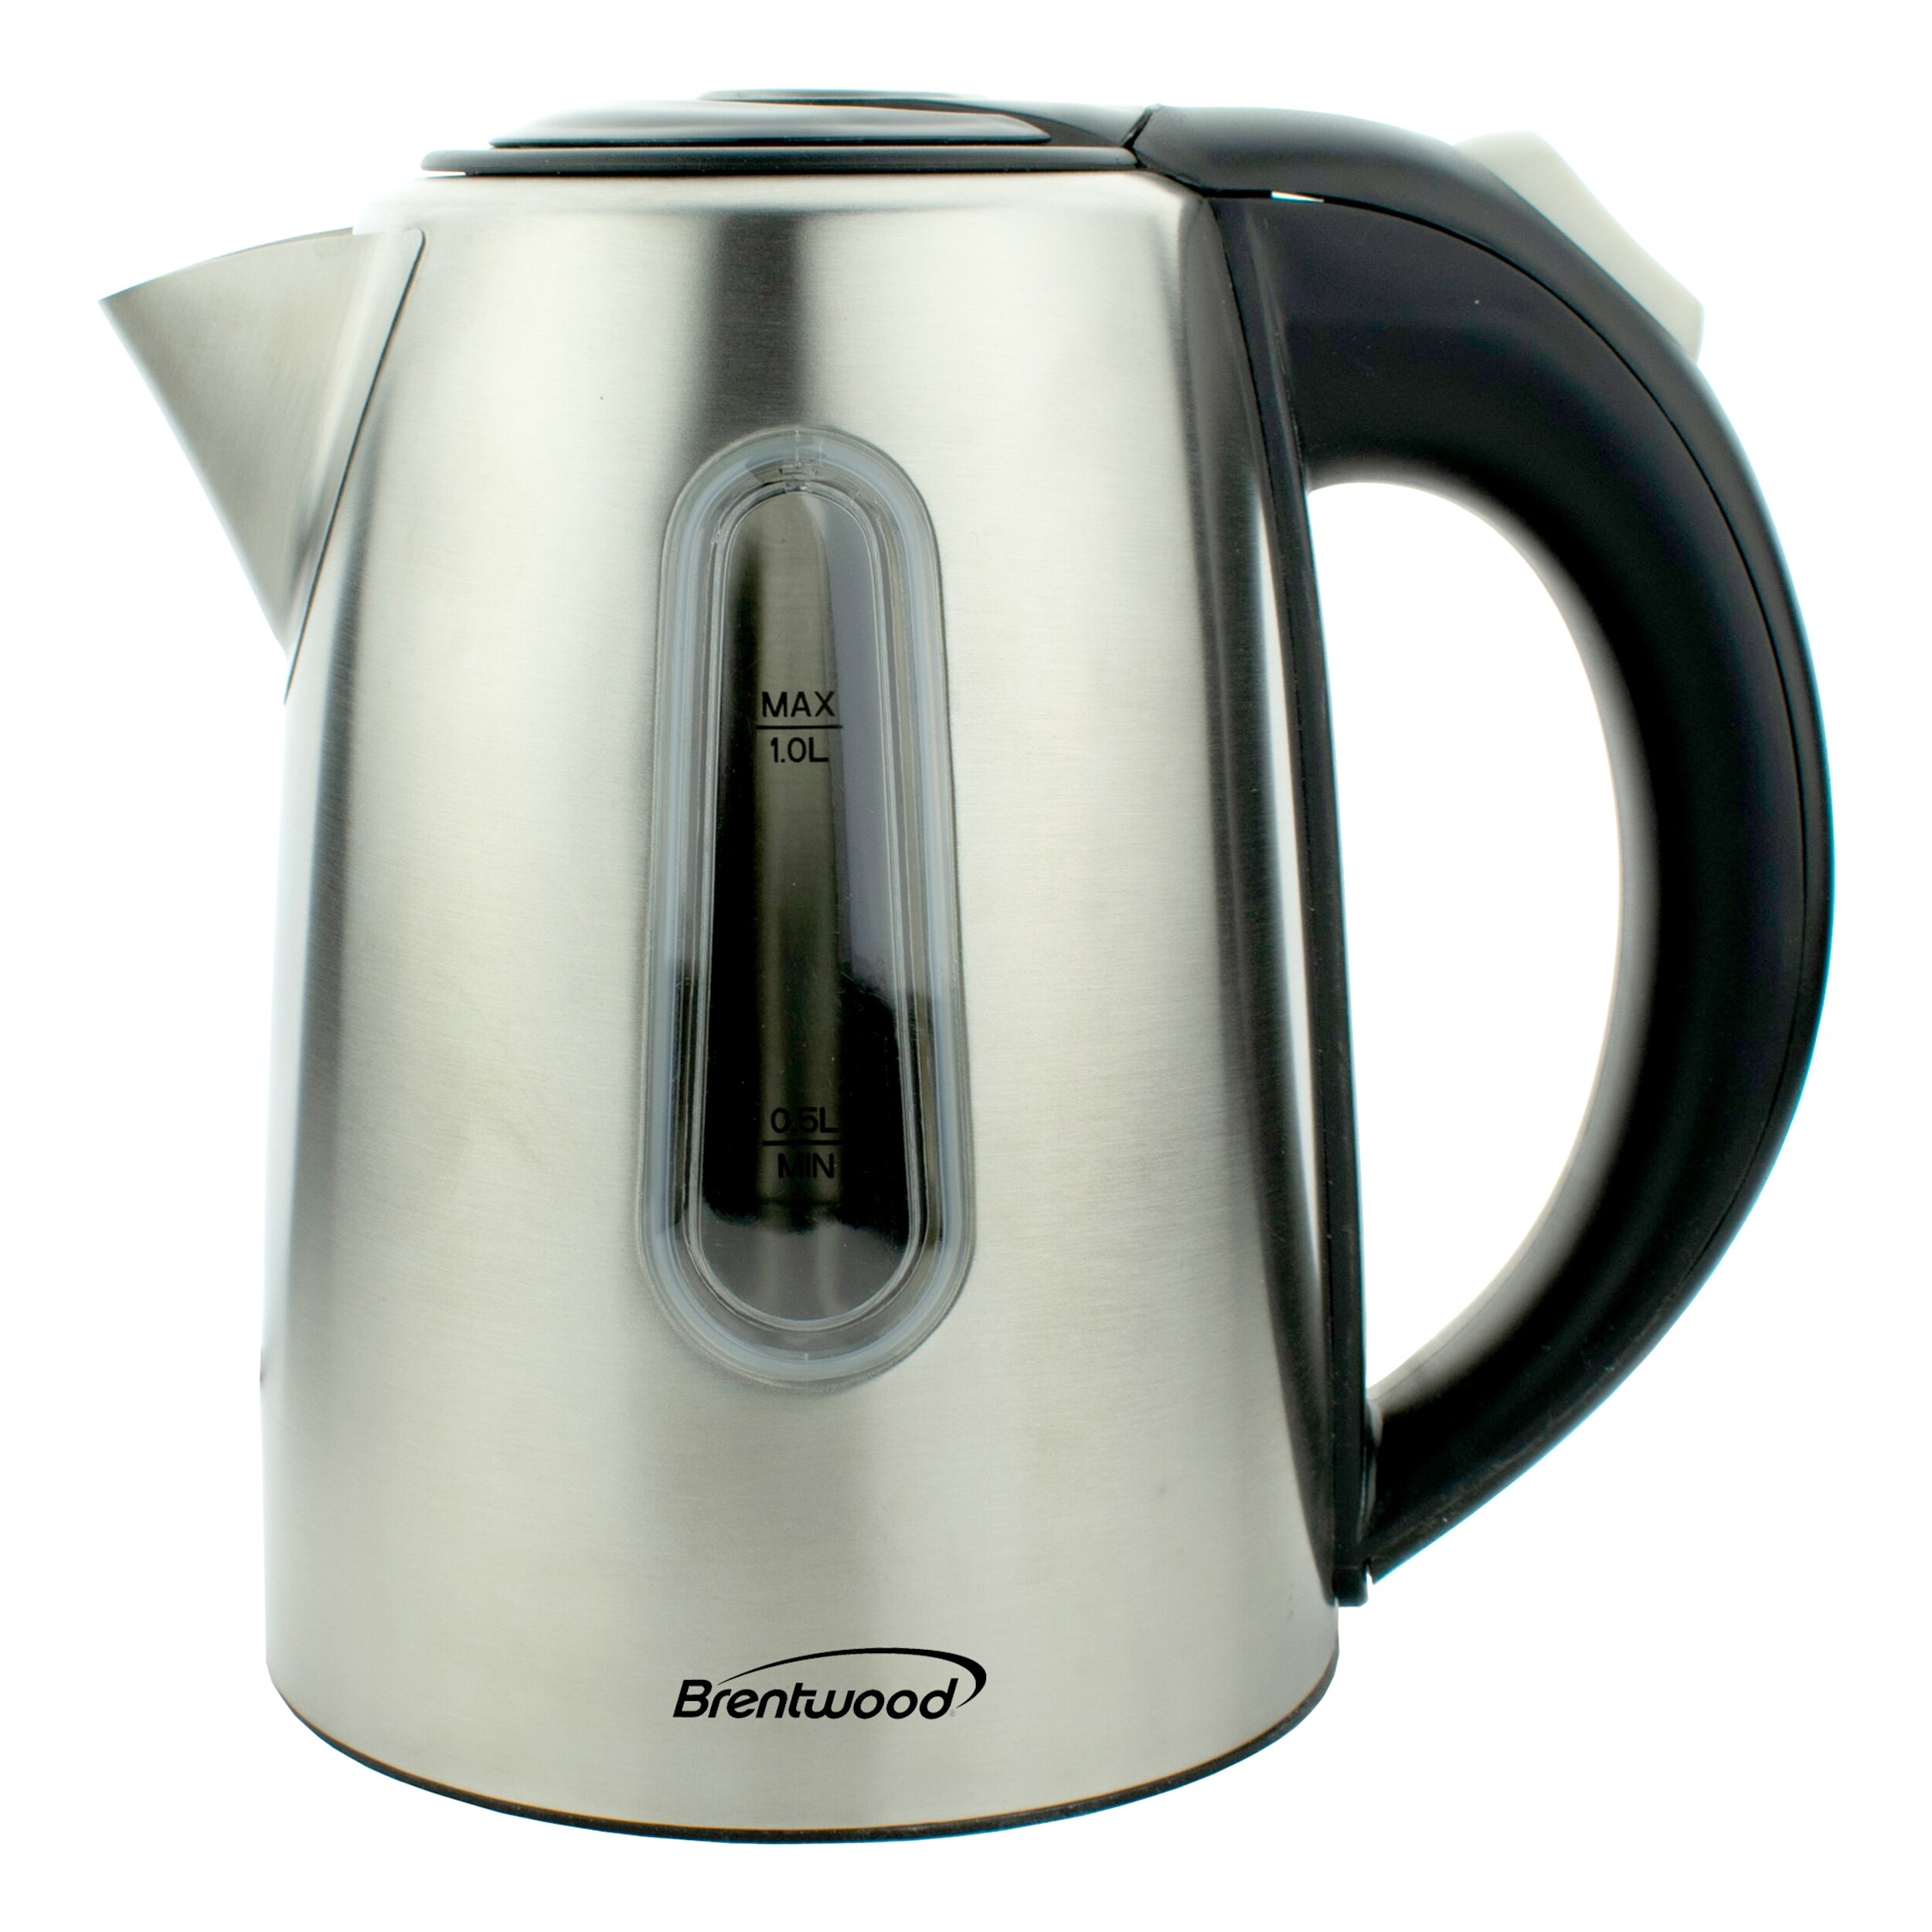 https://ak1.ostkcdn.com/images/products/is/images/direct/4221332023d4519803e6ef3e20bc4bec771e3edf/Brentwood-1-Liter-Stainless-Steel-Cordless-Electric-Kettle.jpg